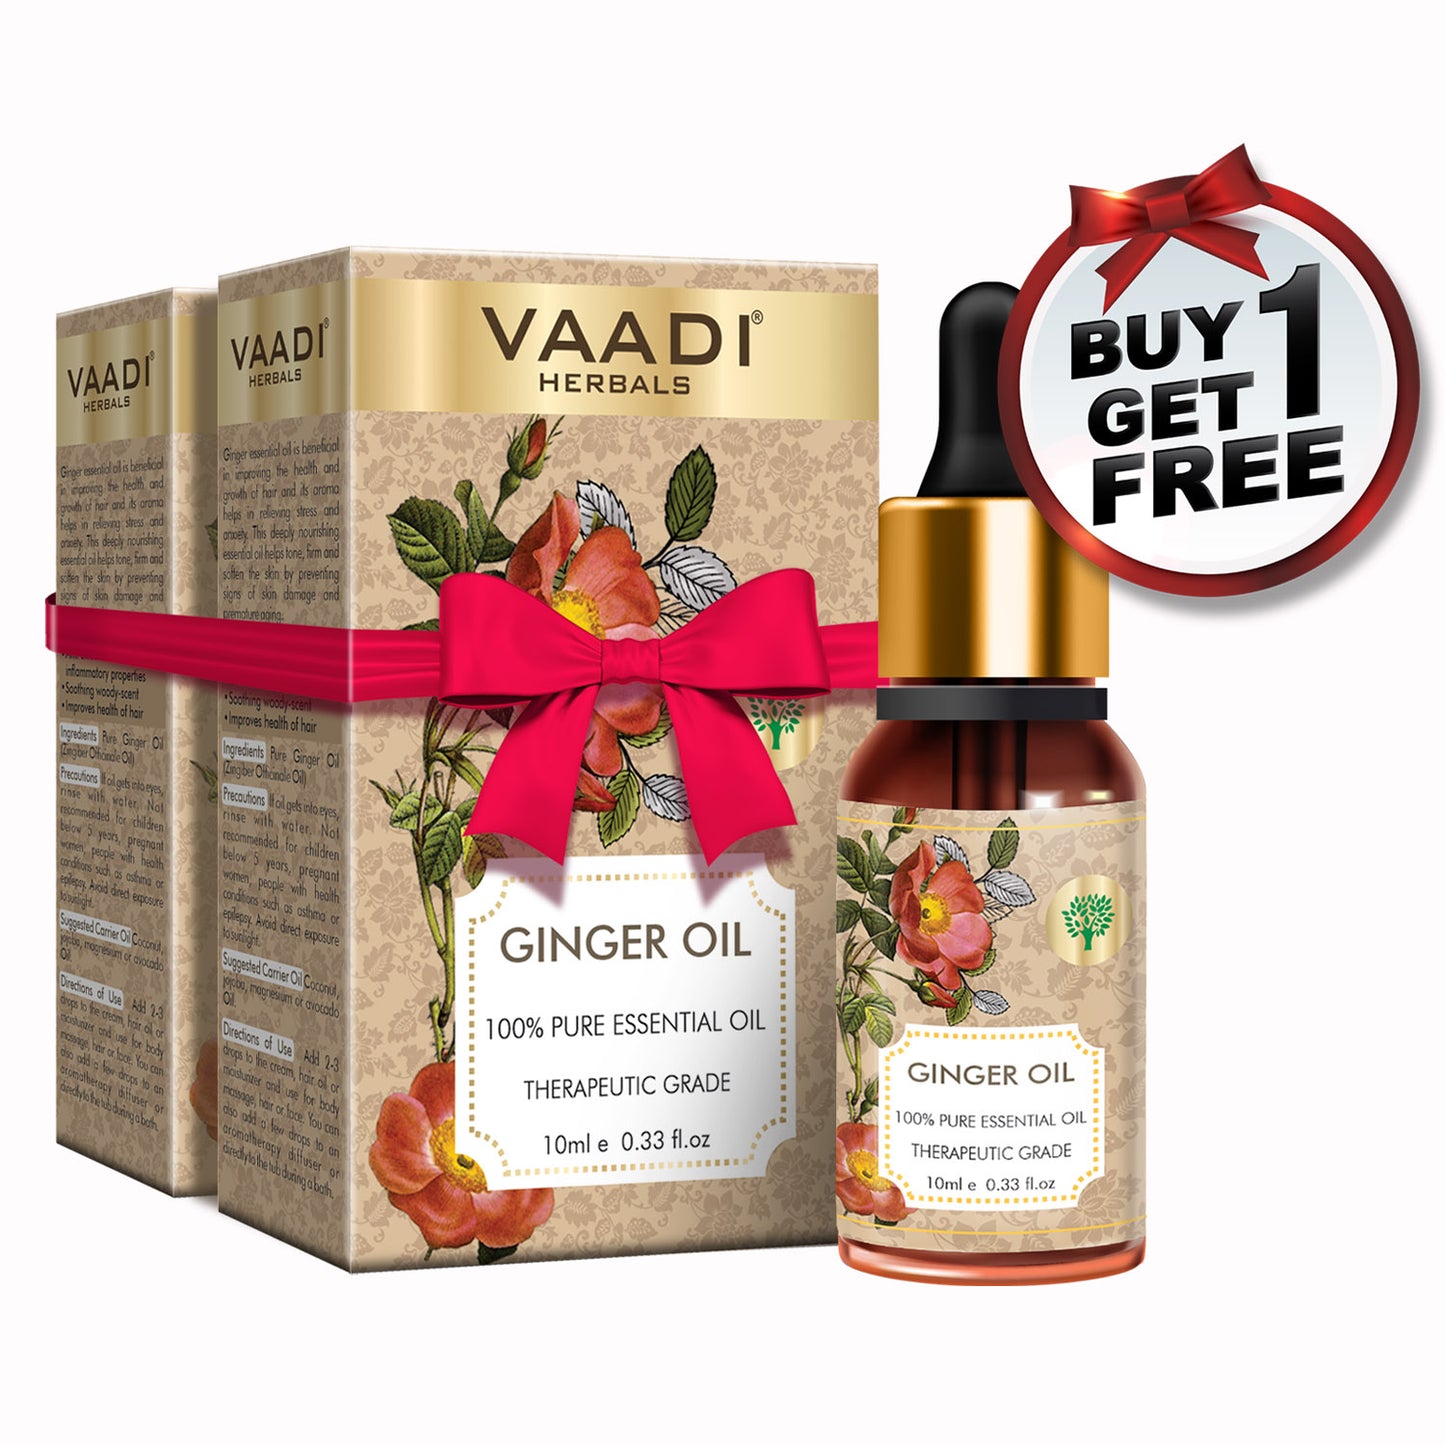 Organic Ginger Essential Oil - Tones Skin, Prevents Hairfall, Soothing Woody Aroma - 100% Pure Therapeutic Grade (10 ml/ 0.33 oz) (Buy 1 Get 1 Free)